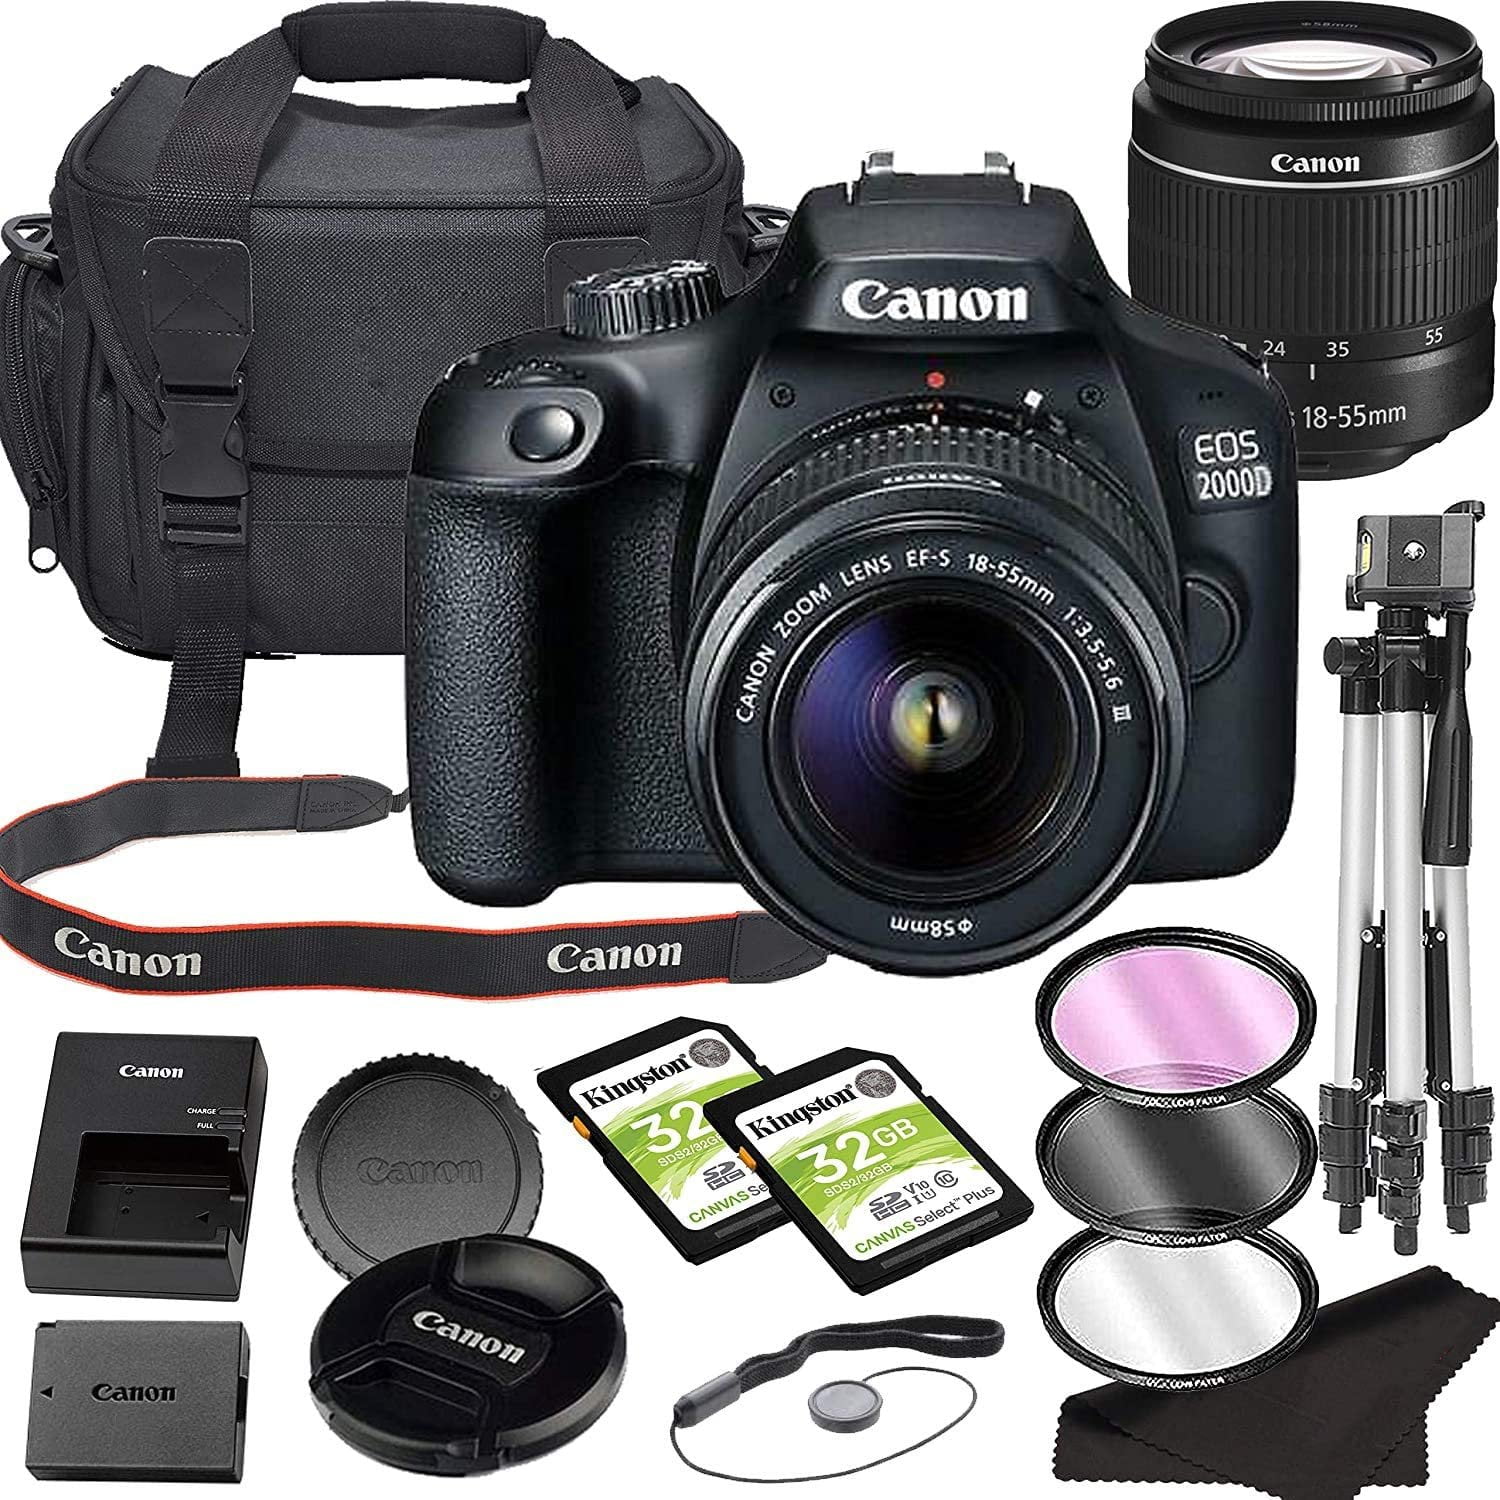 Canon Eos 2000D (Rebel T7) DSLR 24.1MP Camera with 18-55mm Lens with Built-In Wi-Fi|24.1 Mp CMOS Sensor, |digic 4+ Image Processor and Full HD